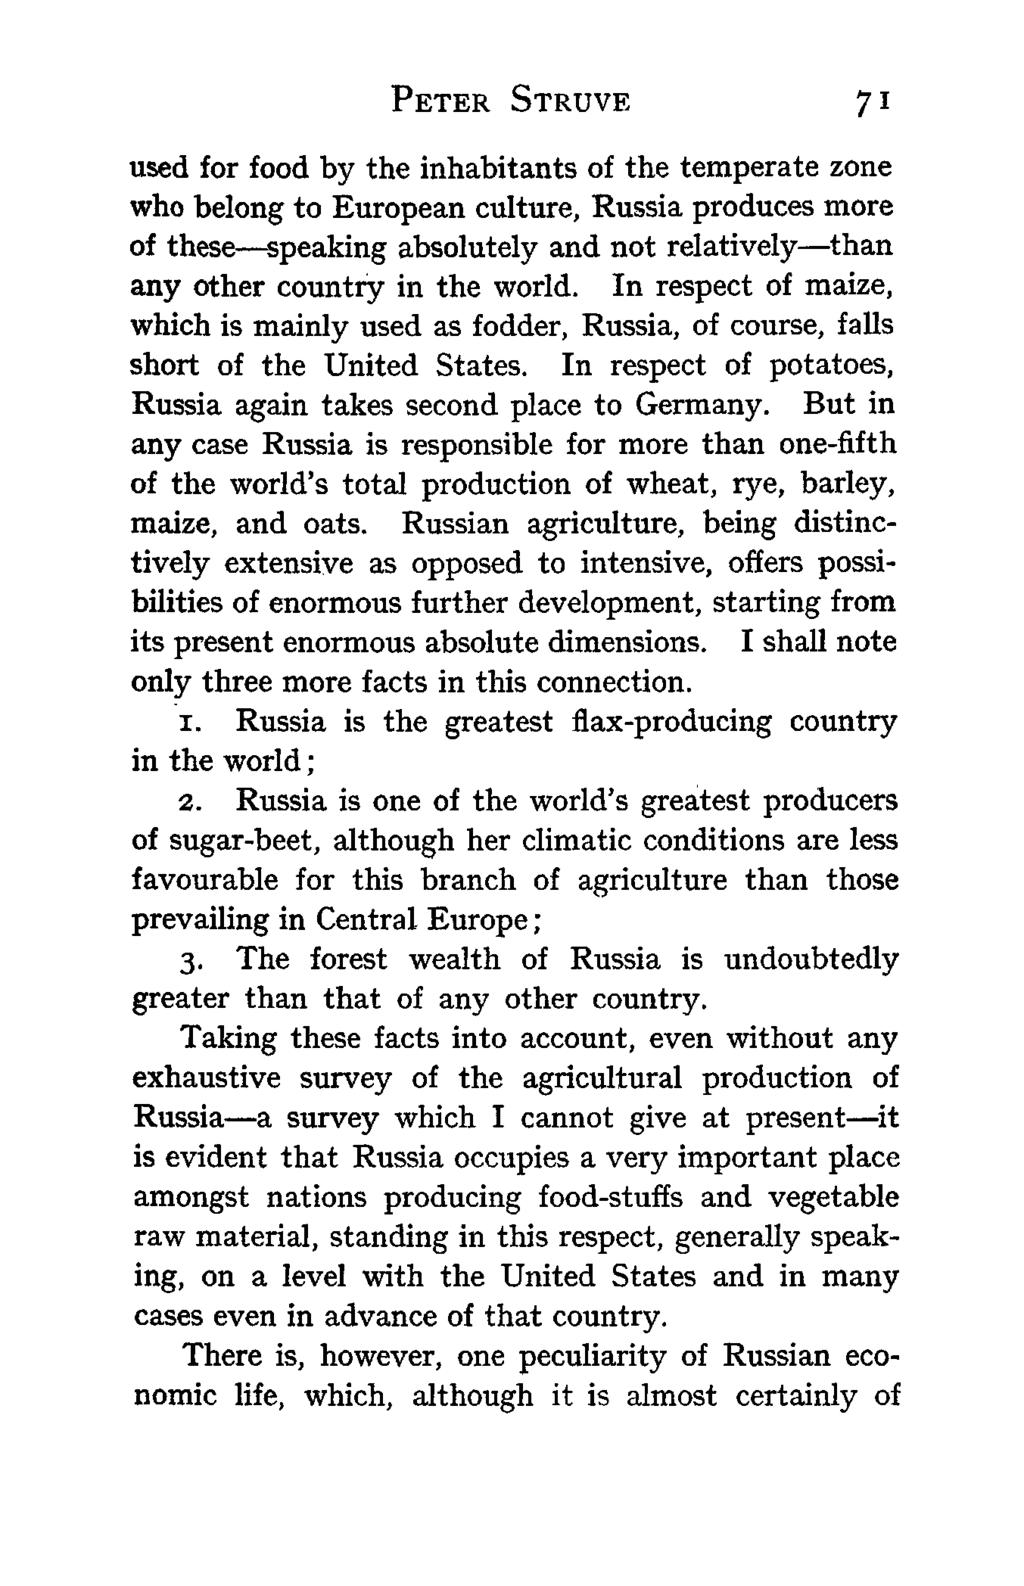 PETER STRUVE 71 used for food by the inhabitants of the temperate zone who belong to European culture, Russia produces more of these speaking absolutely and not relatively than any other country in